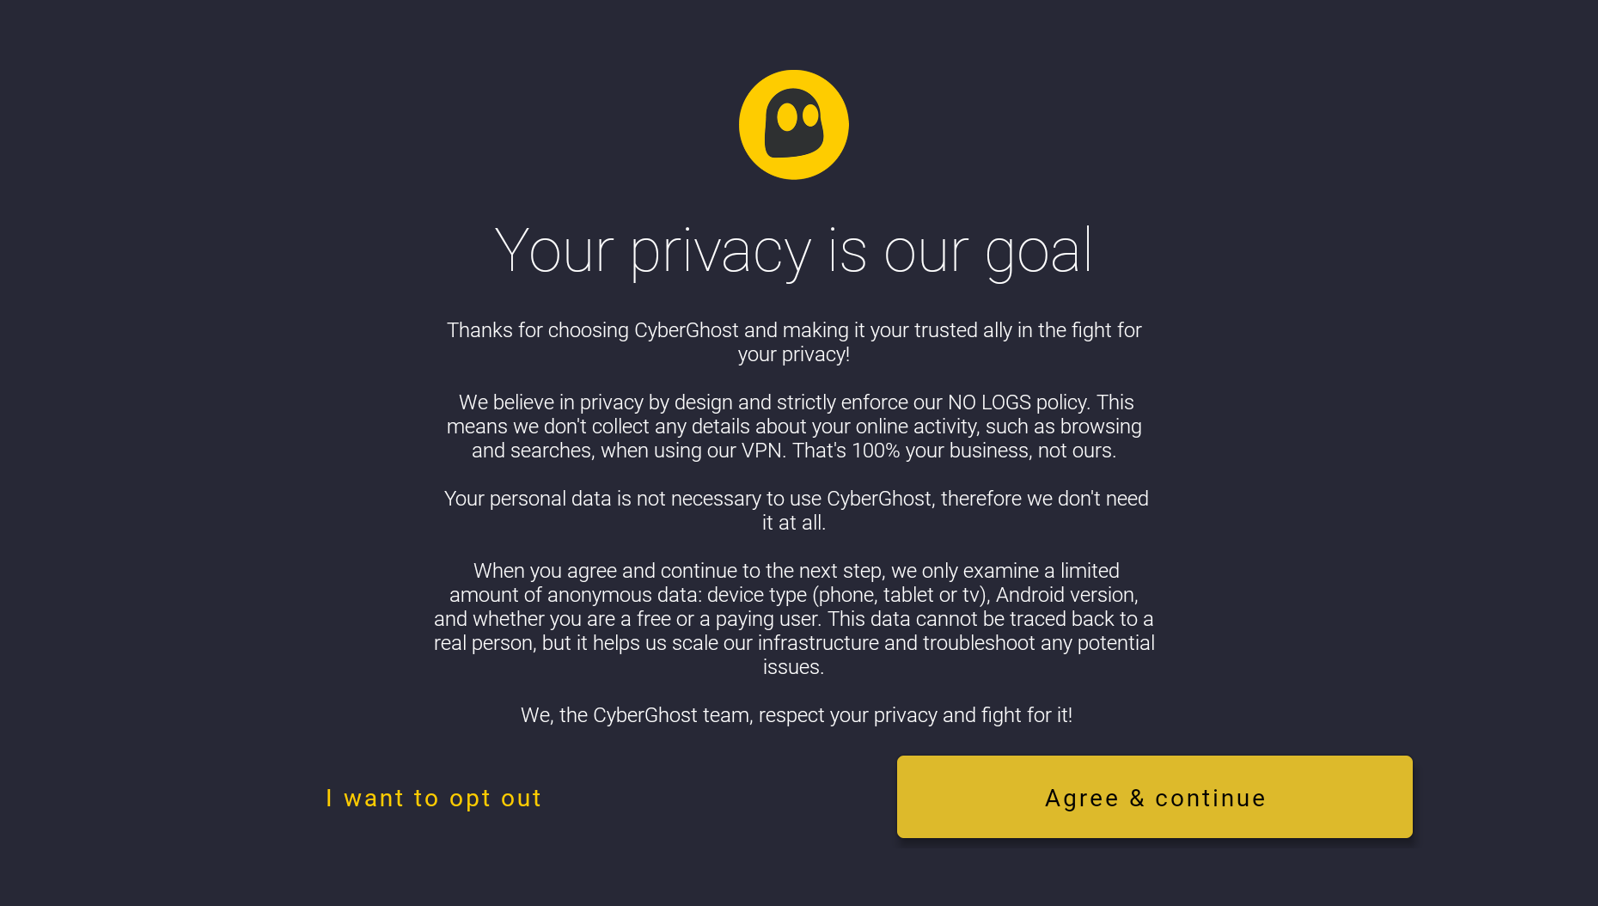 Screenshot of CyberGhost statement about privacy.